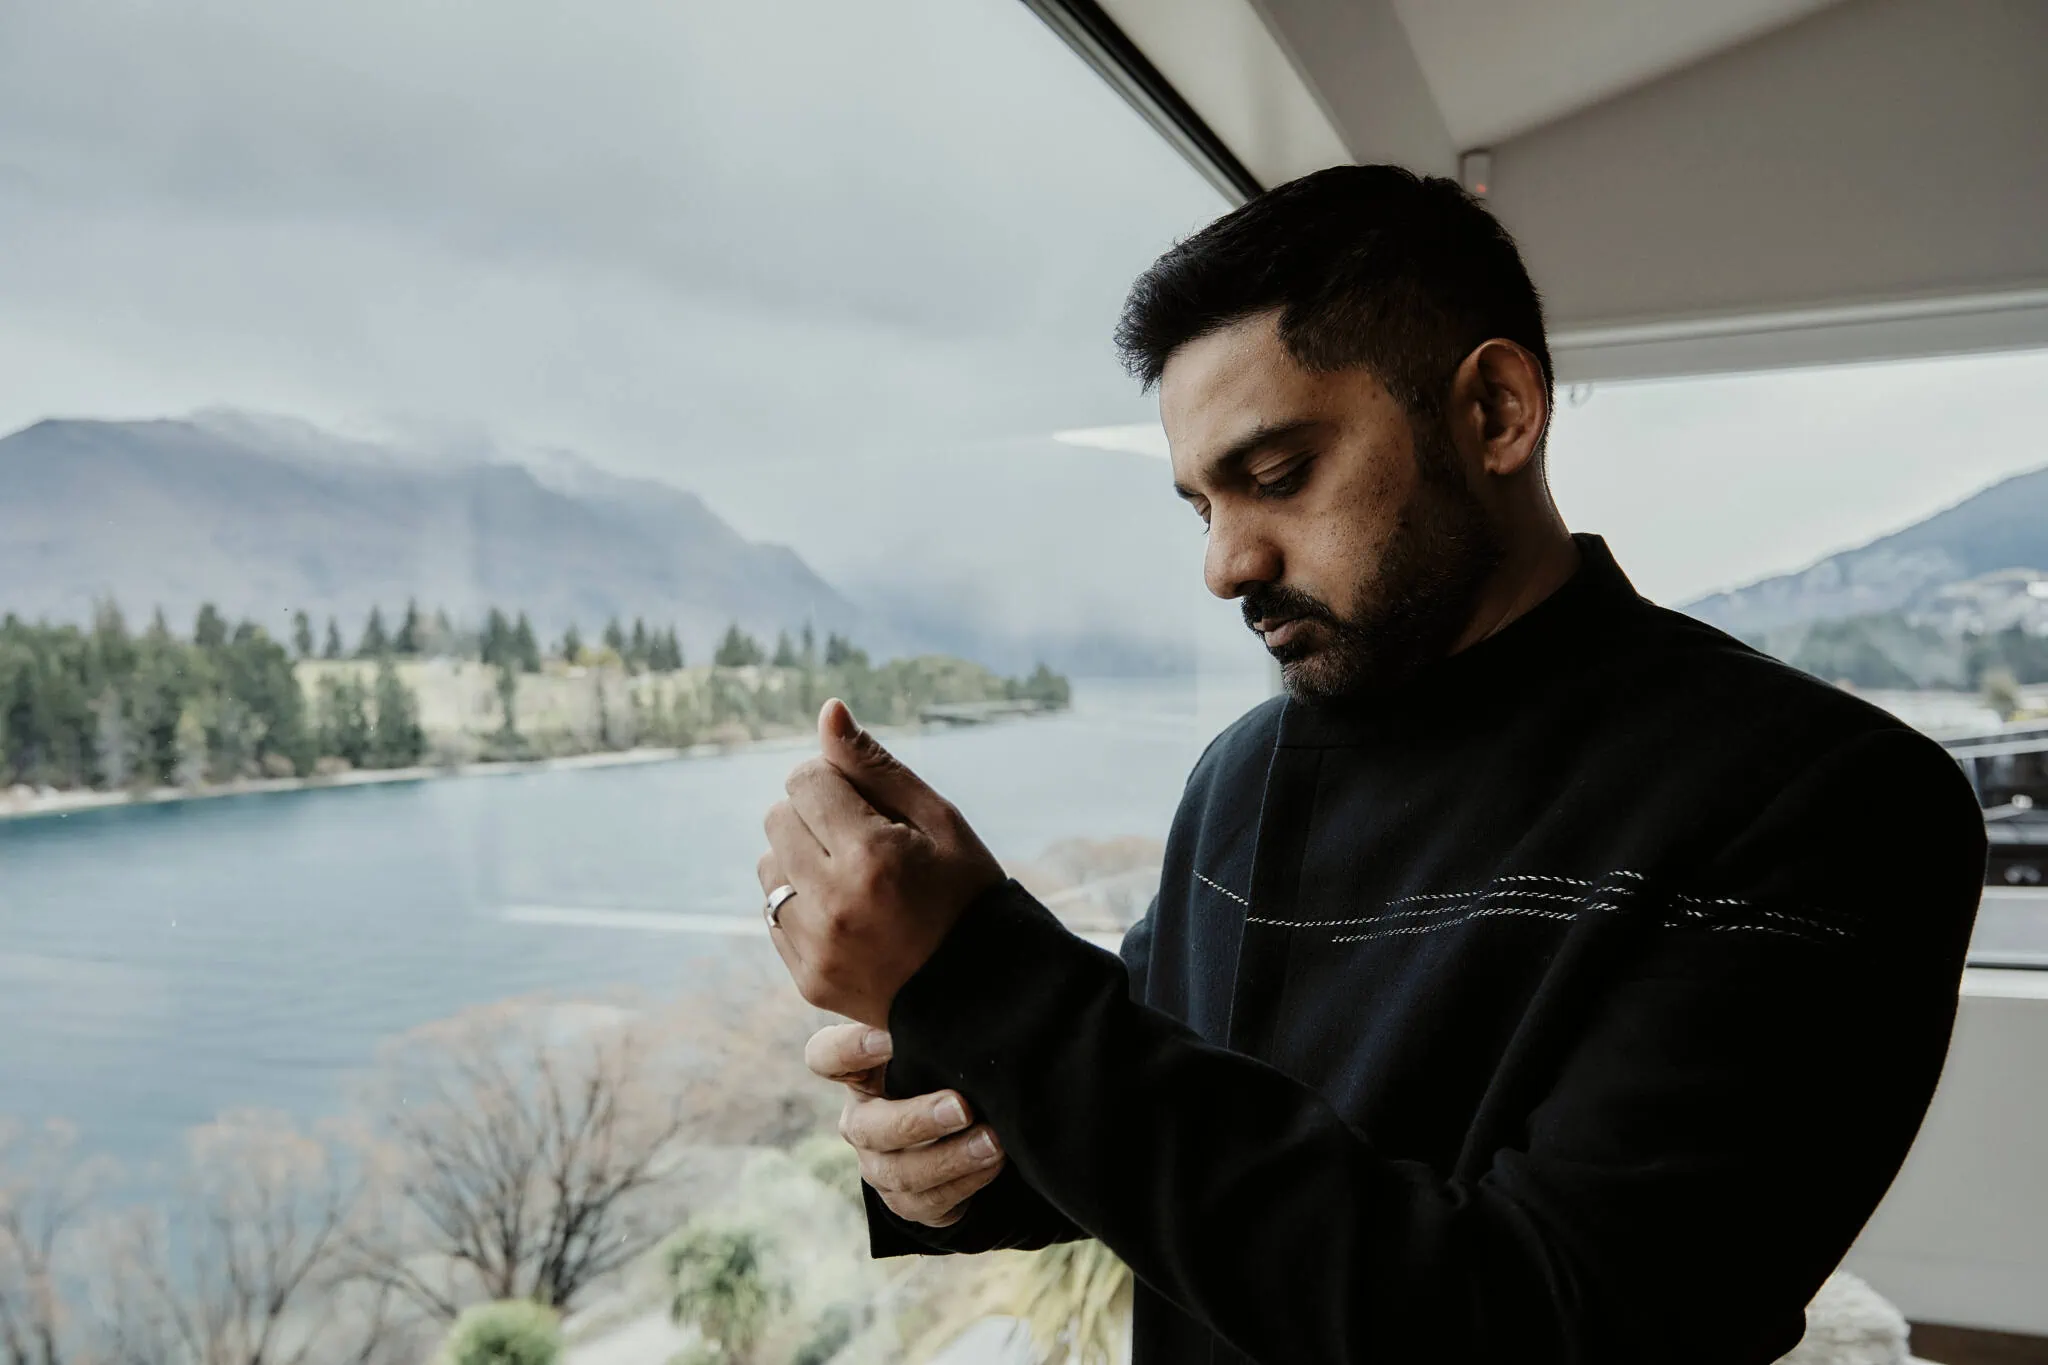 Queenstown New Zealand Elopement Wedding Photographer - A man, Wasim, looking out of a window at Queenstown lake during his Islamic wedding with Yumn.